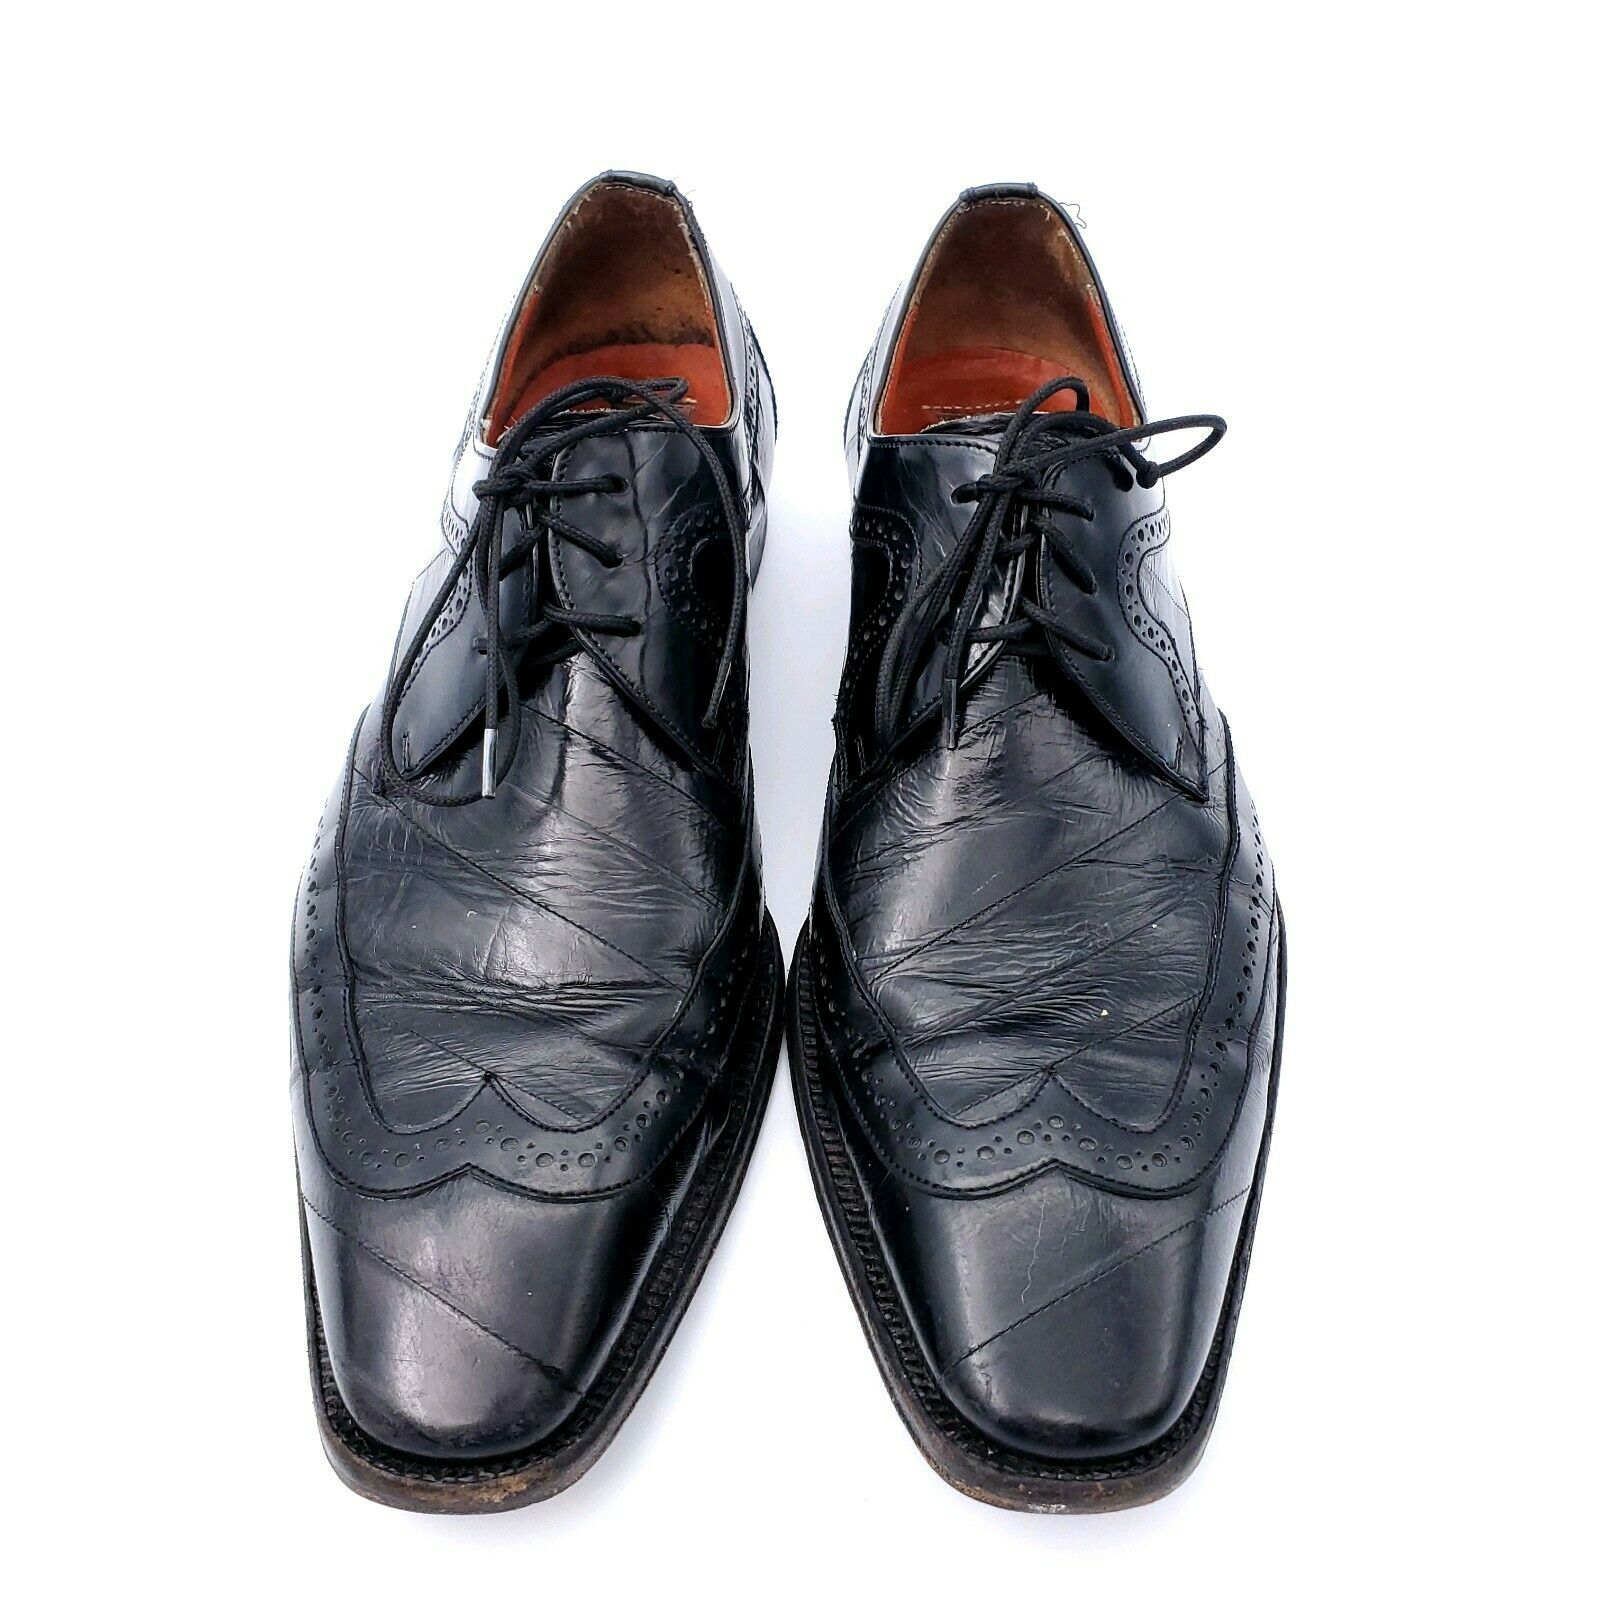 Mezlan Wingtip Dress Shoes Leather Black Man Made In Spain Oxford Mens 8 M Young